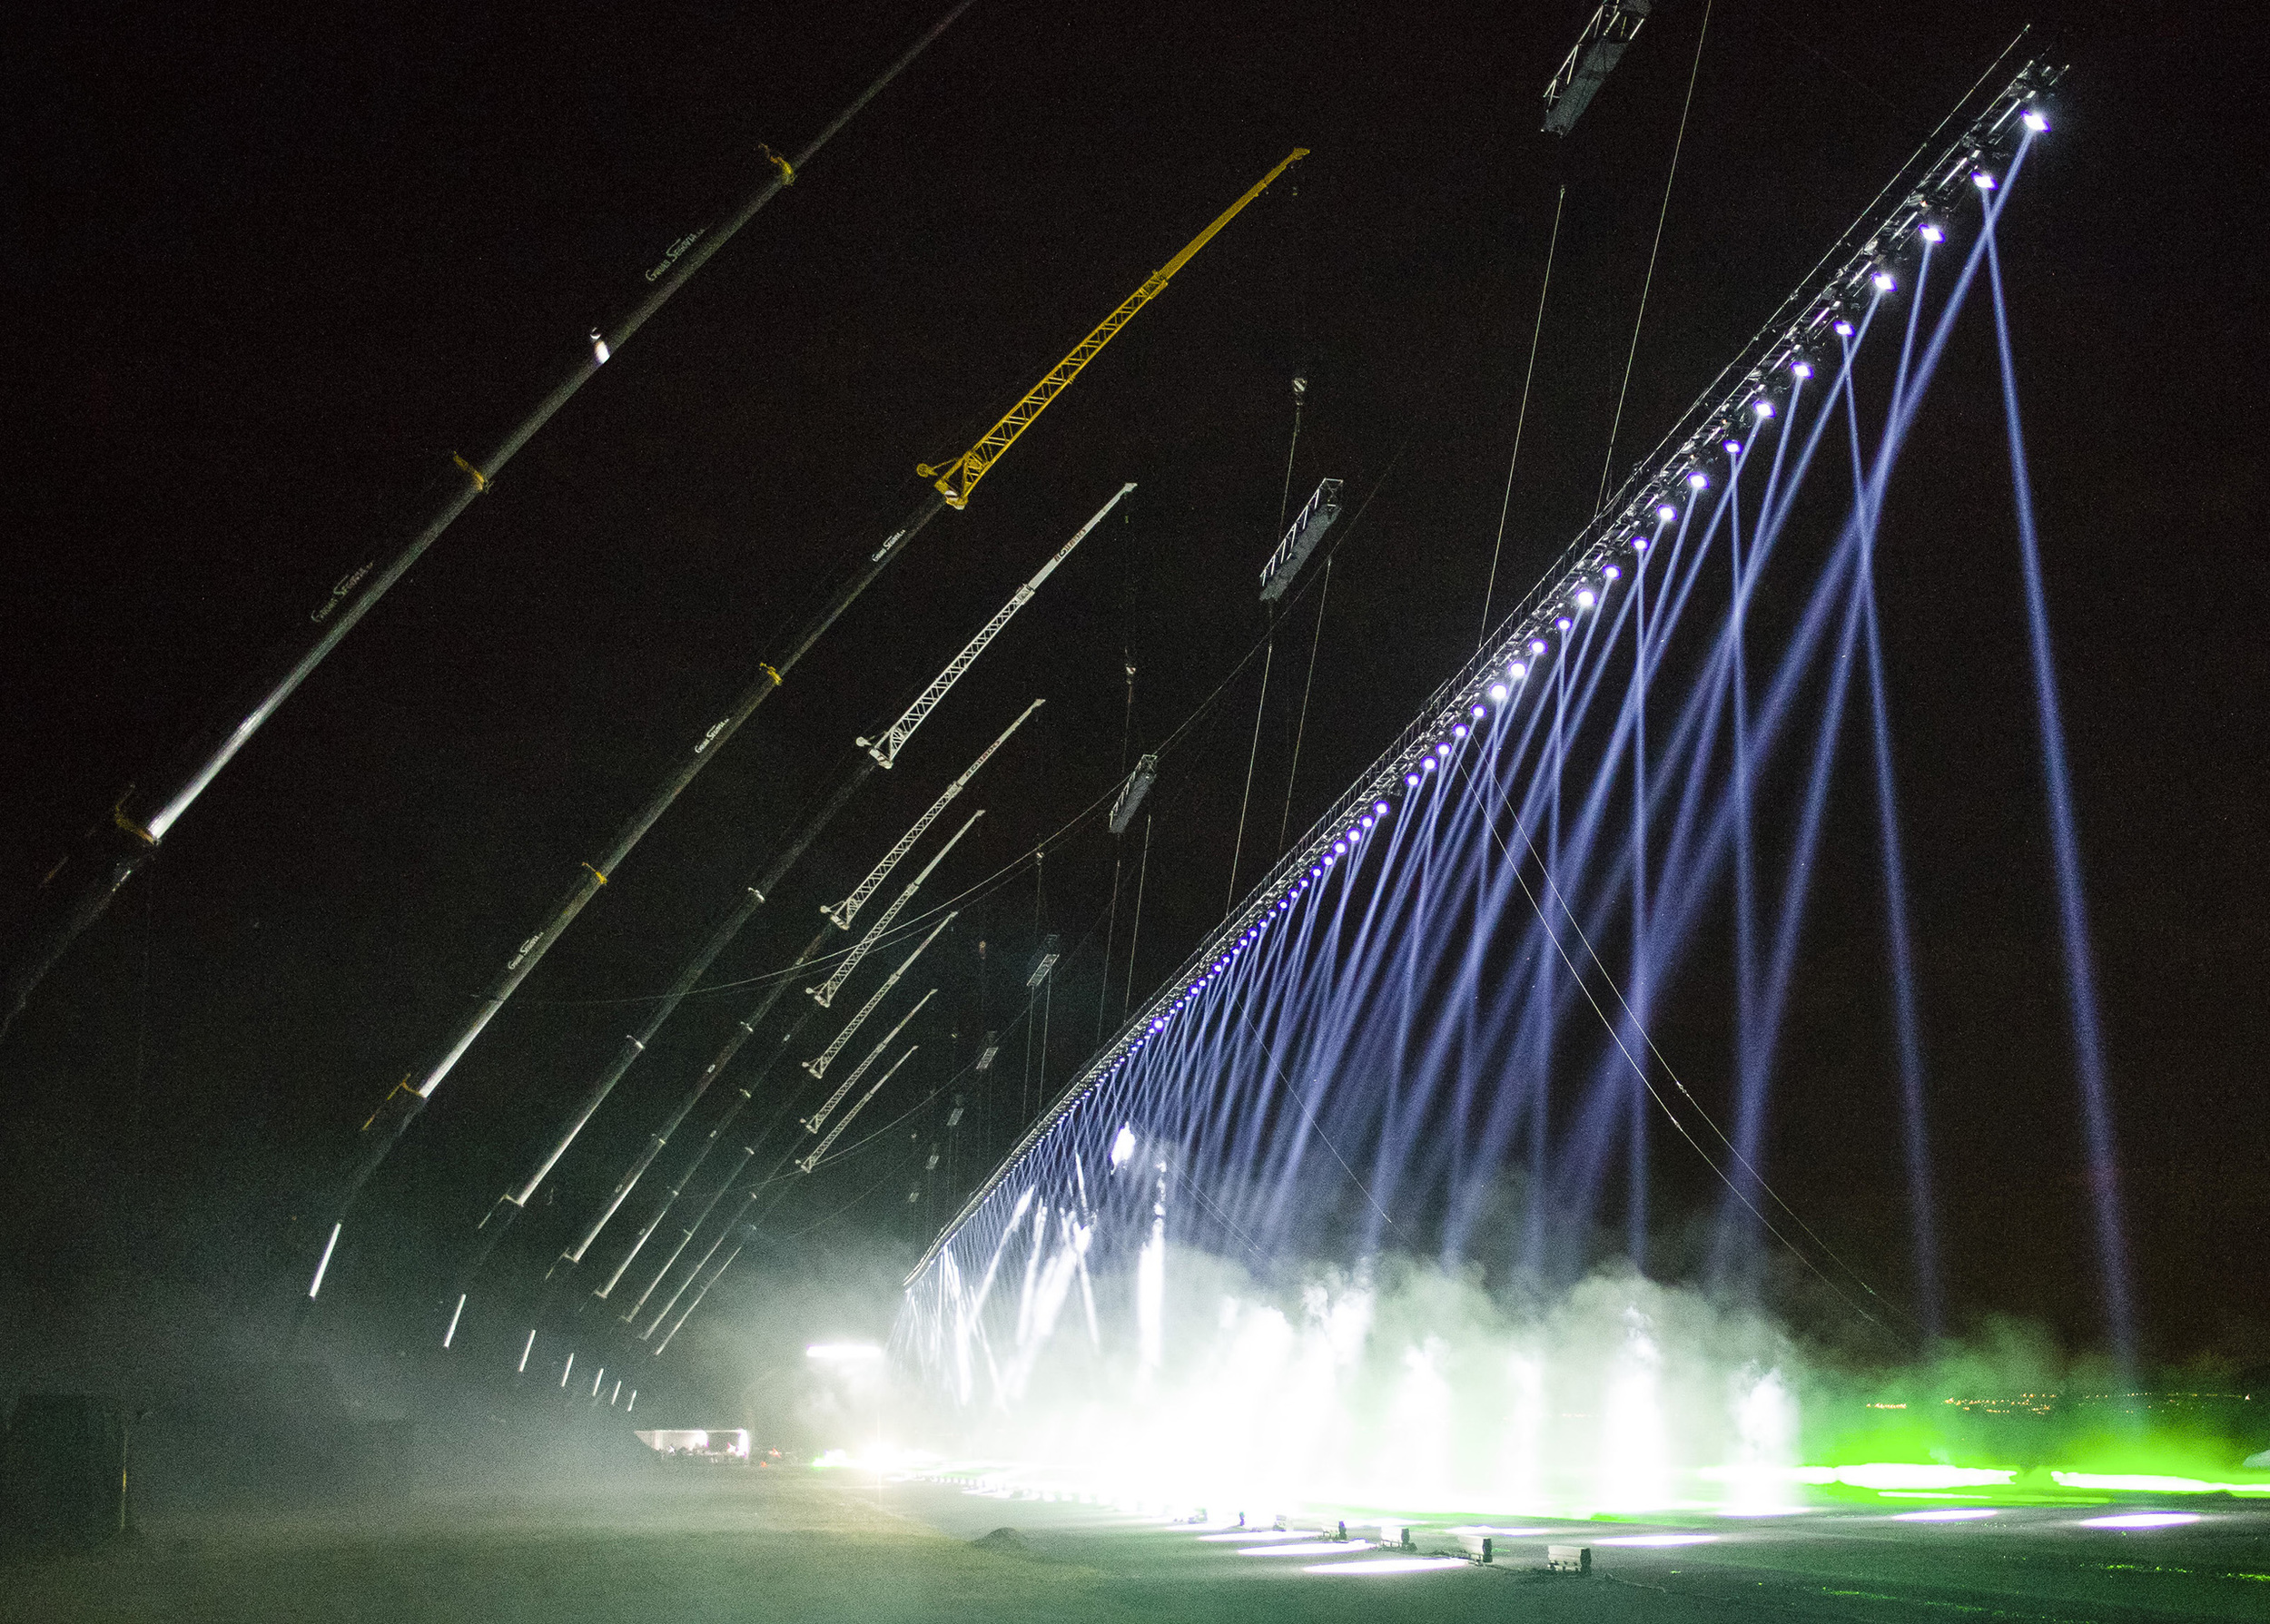 will.i.am and Lexus create Laser and sound spectacular